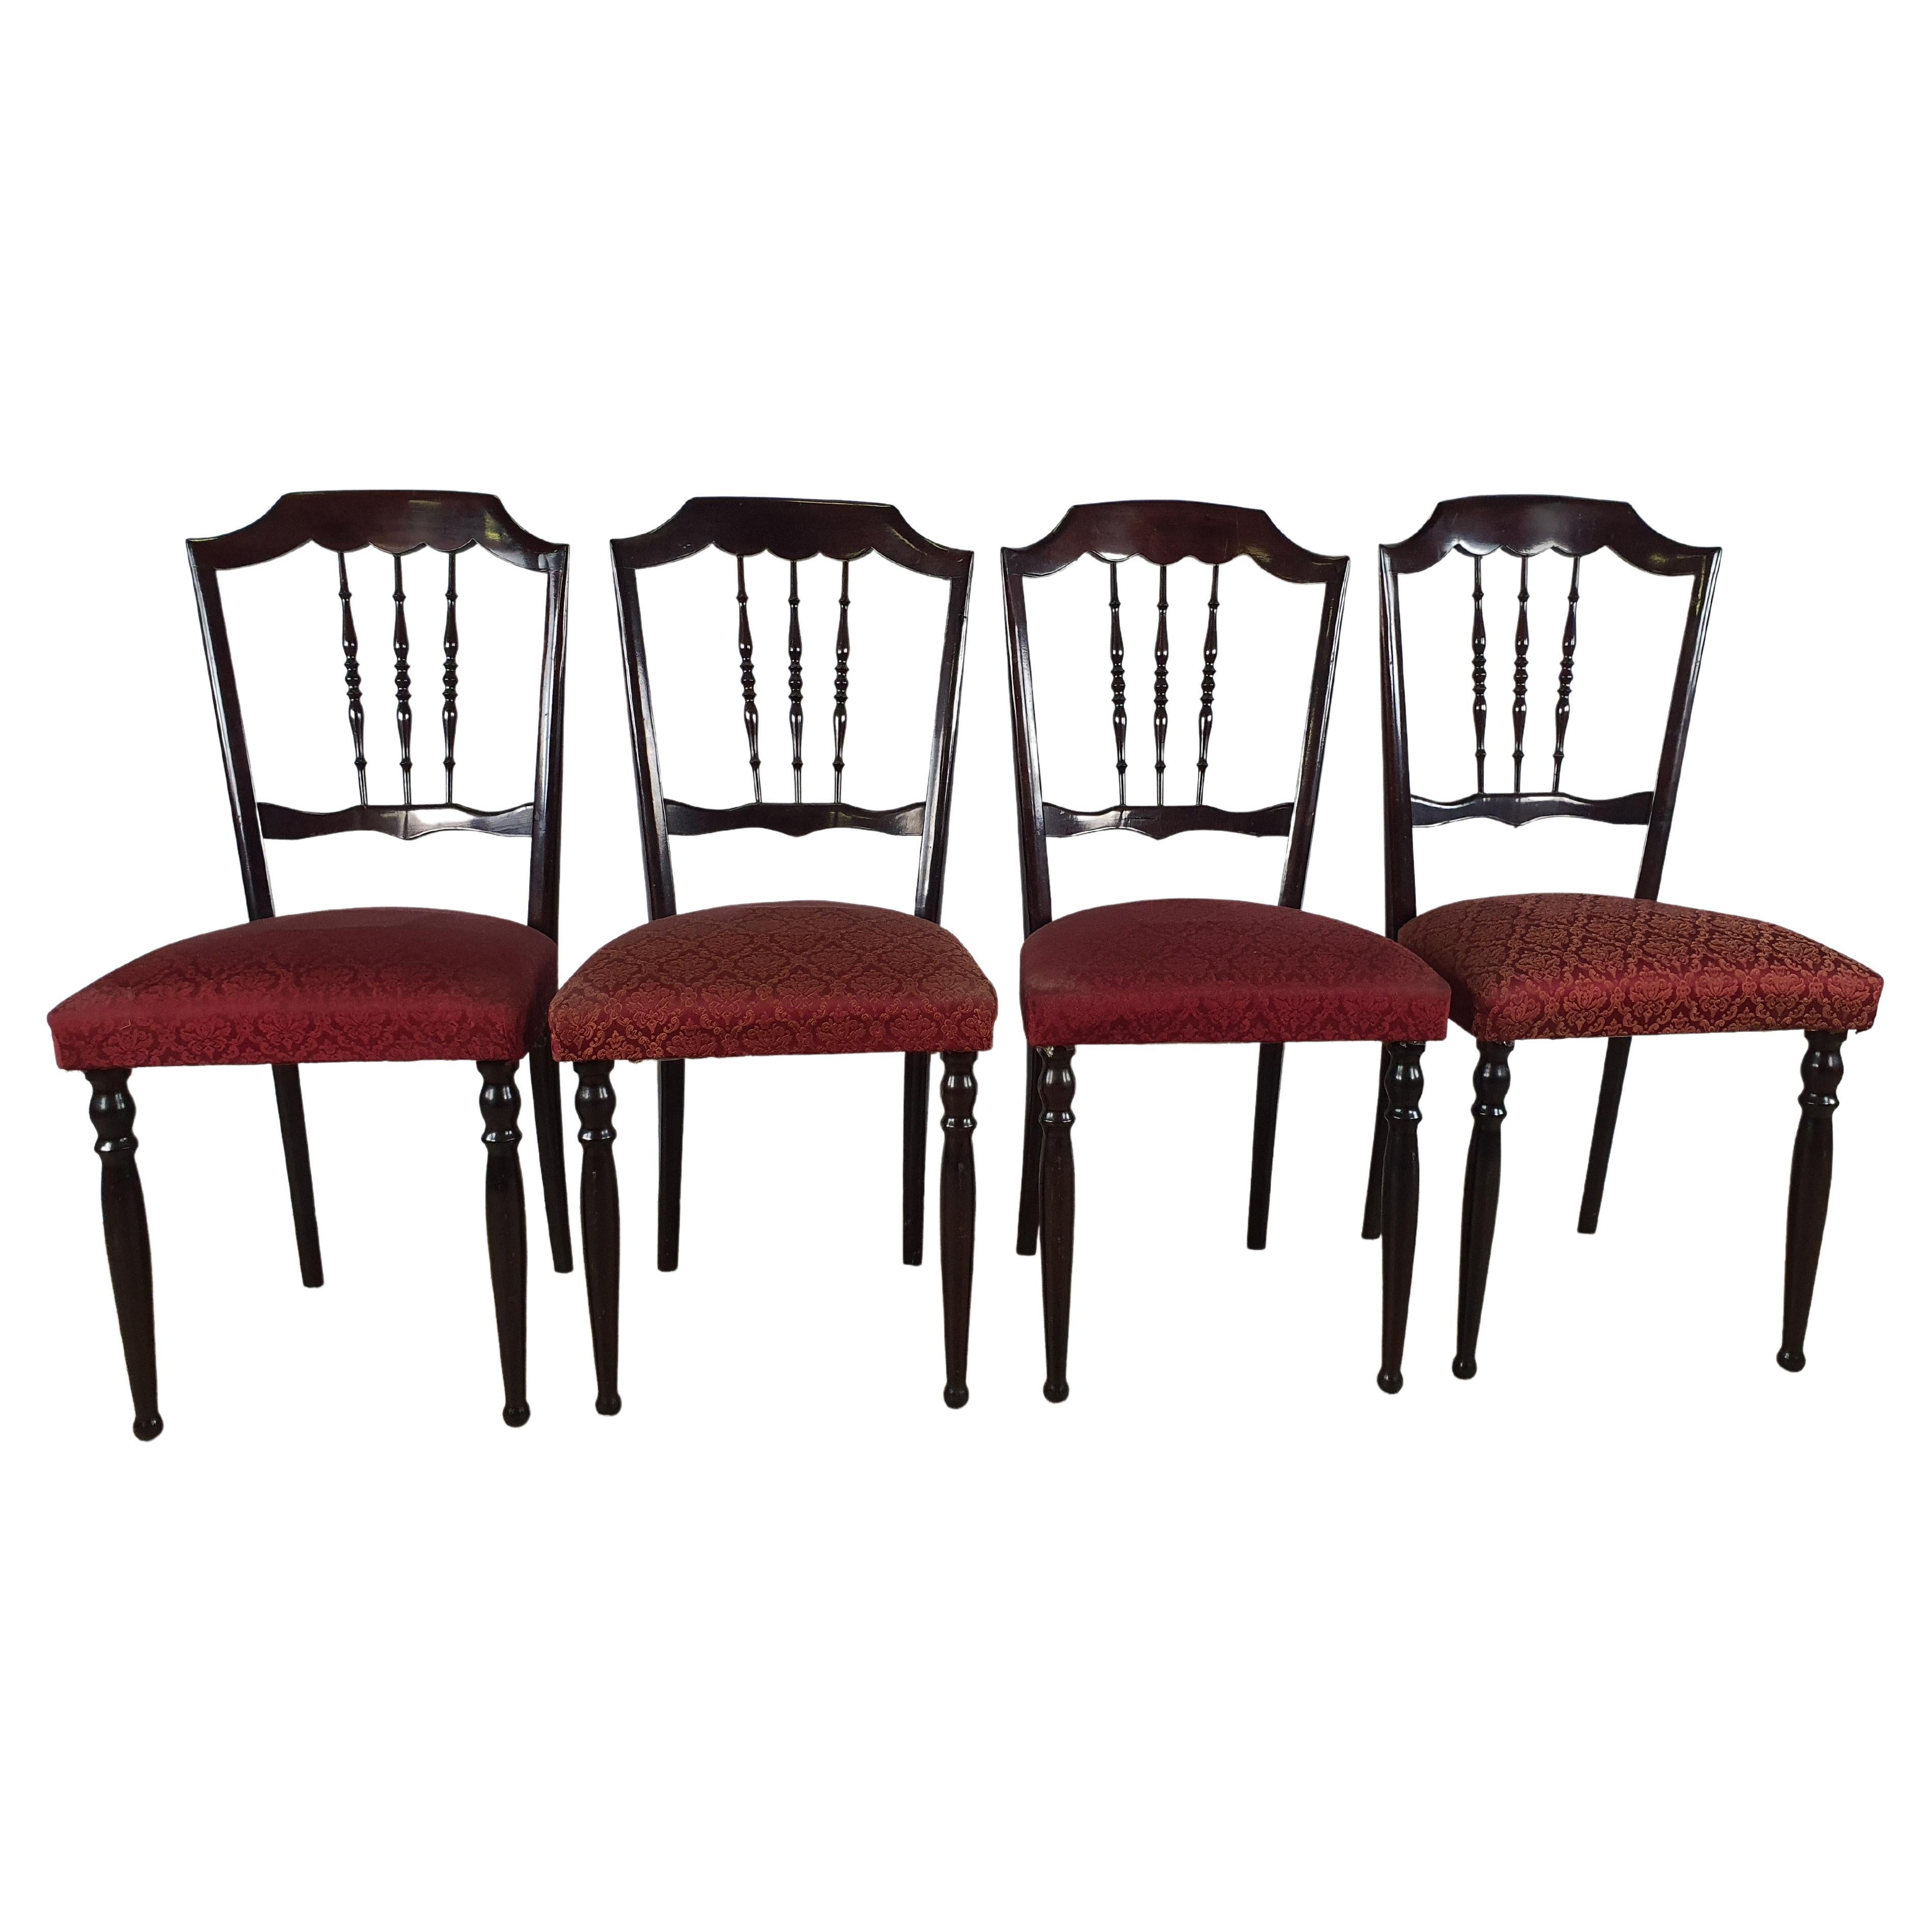 Set of Four Vintage Dining Room Chairs